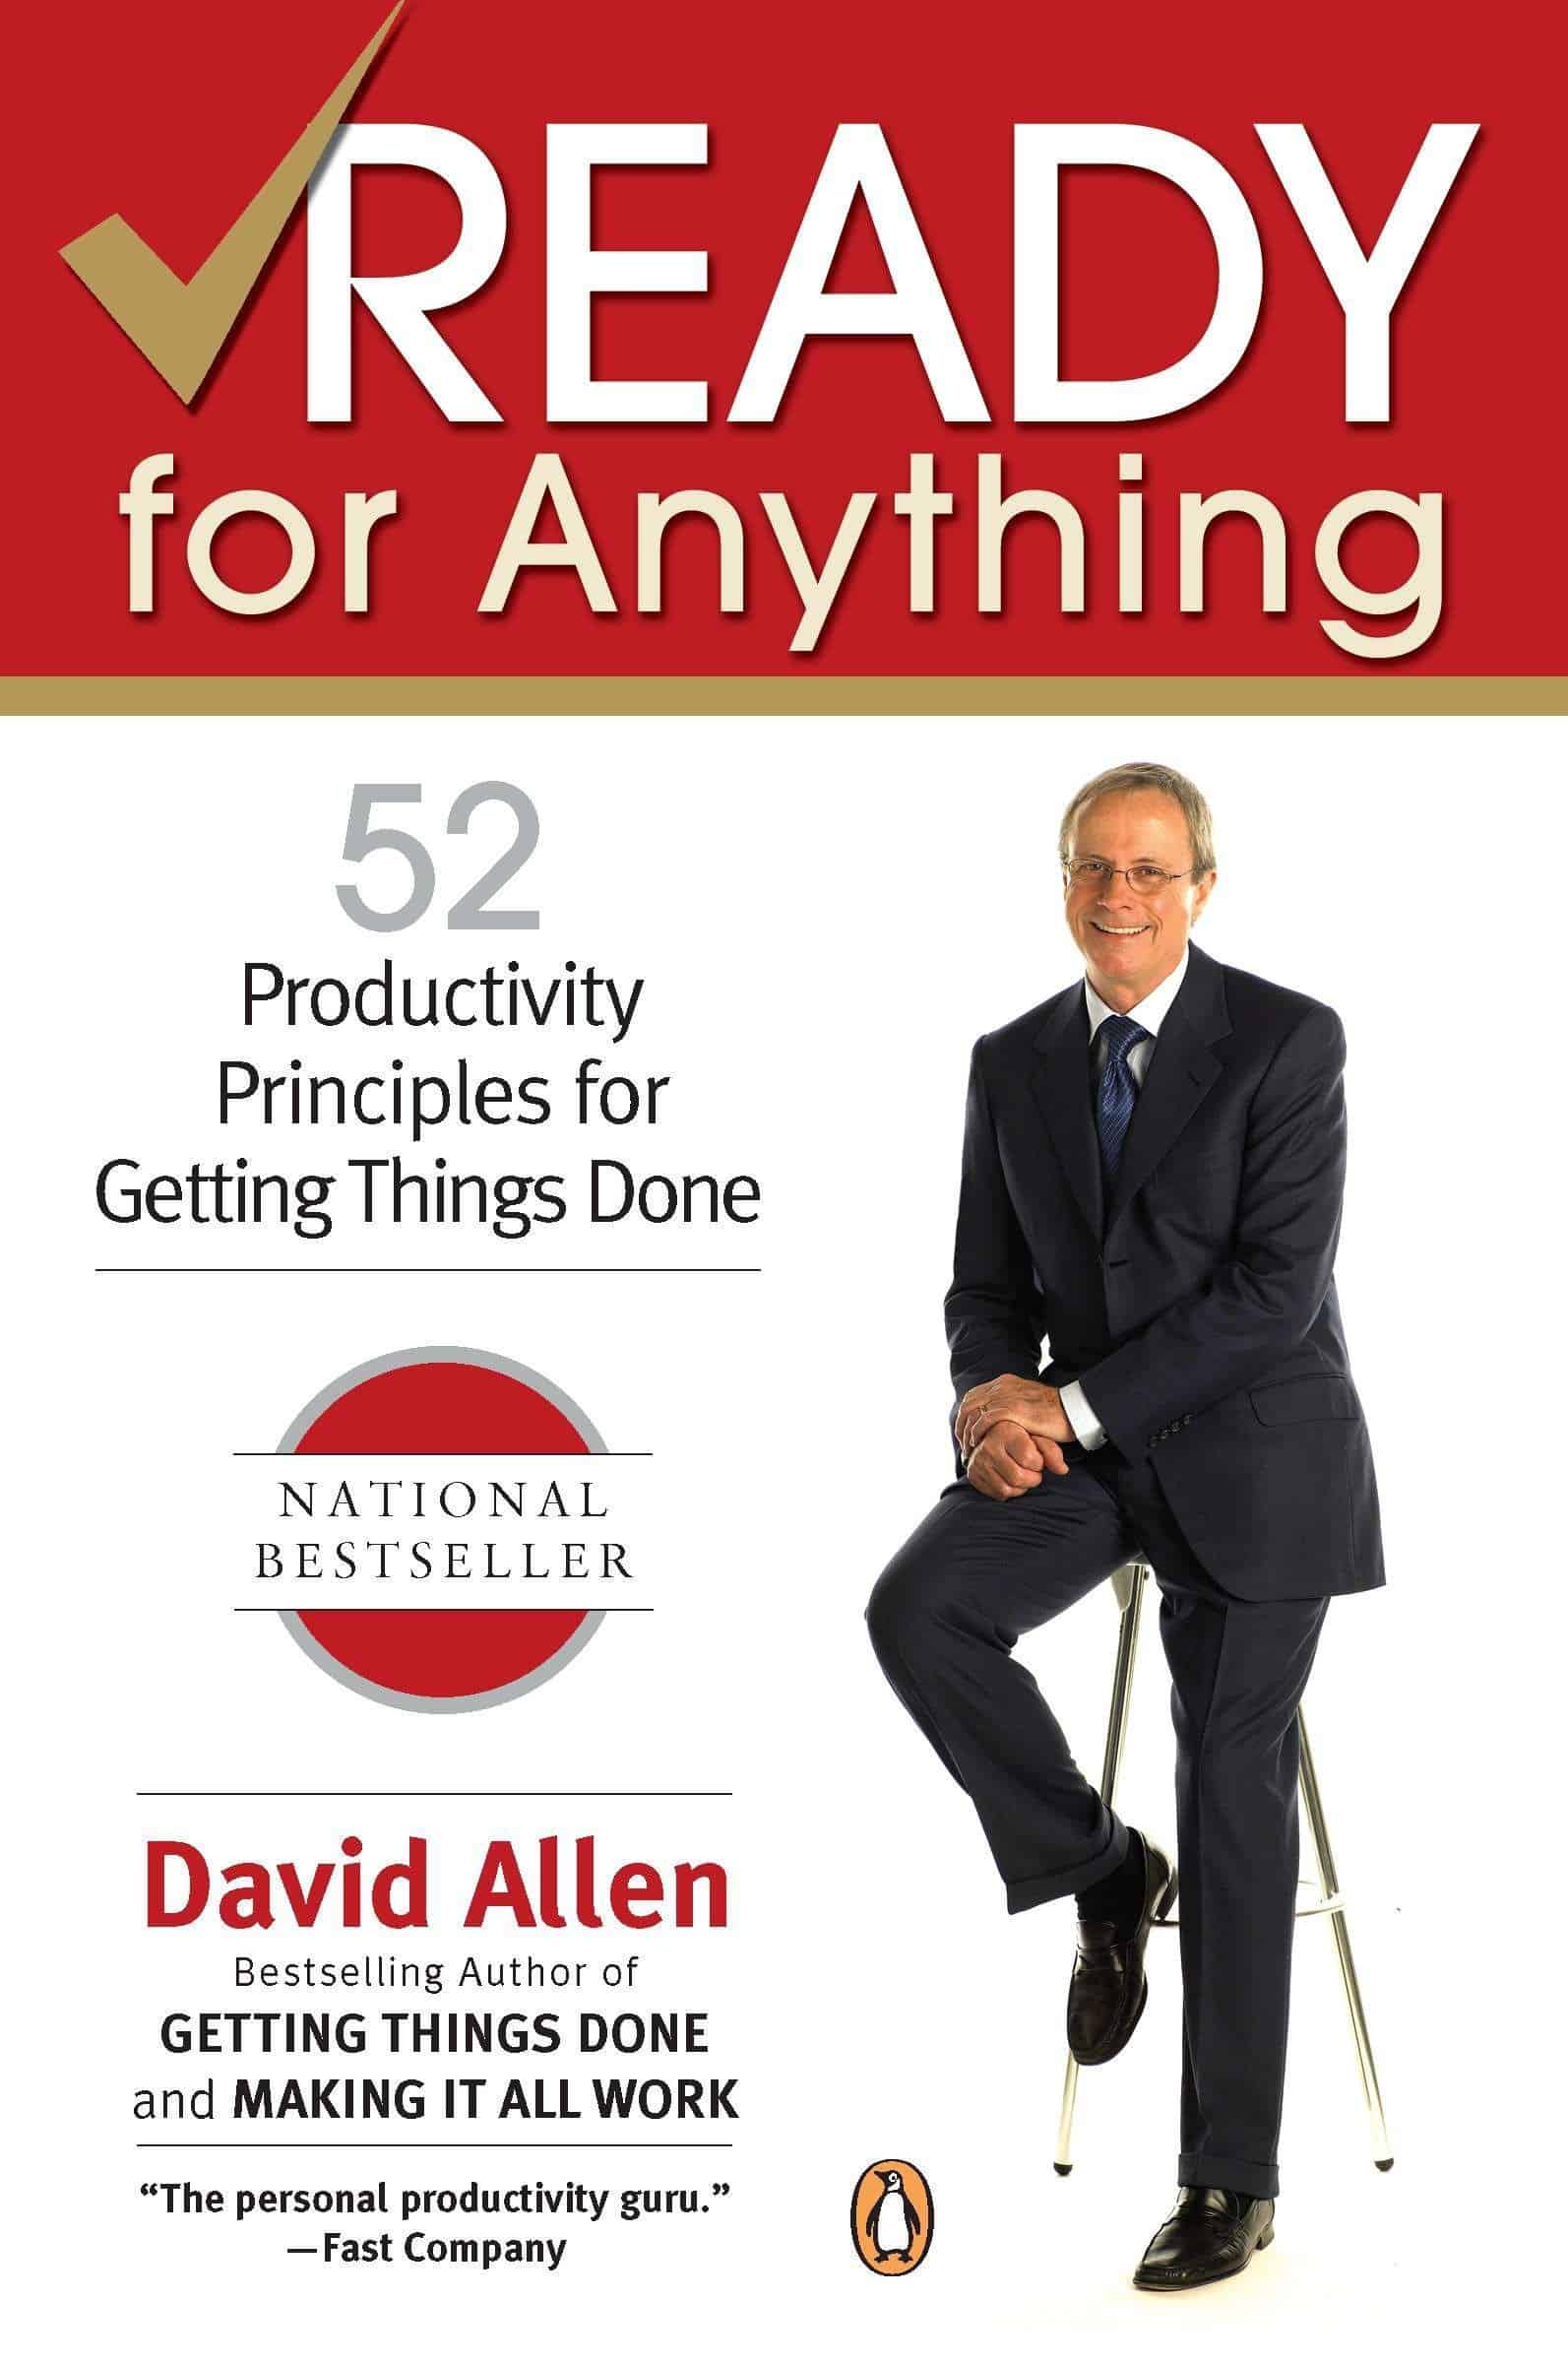 30 Best Productivity Books You Should Read To Boost Your Productivity